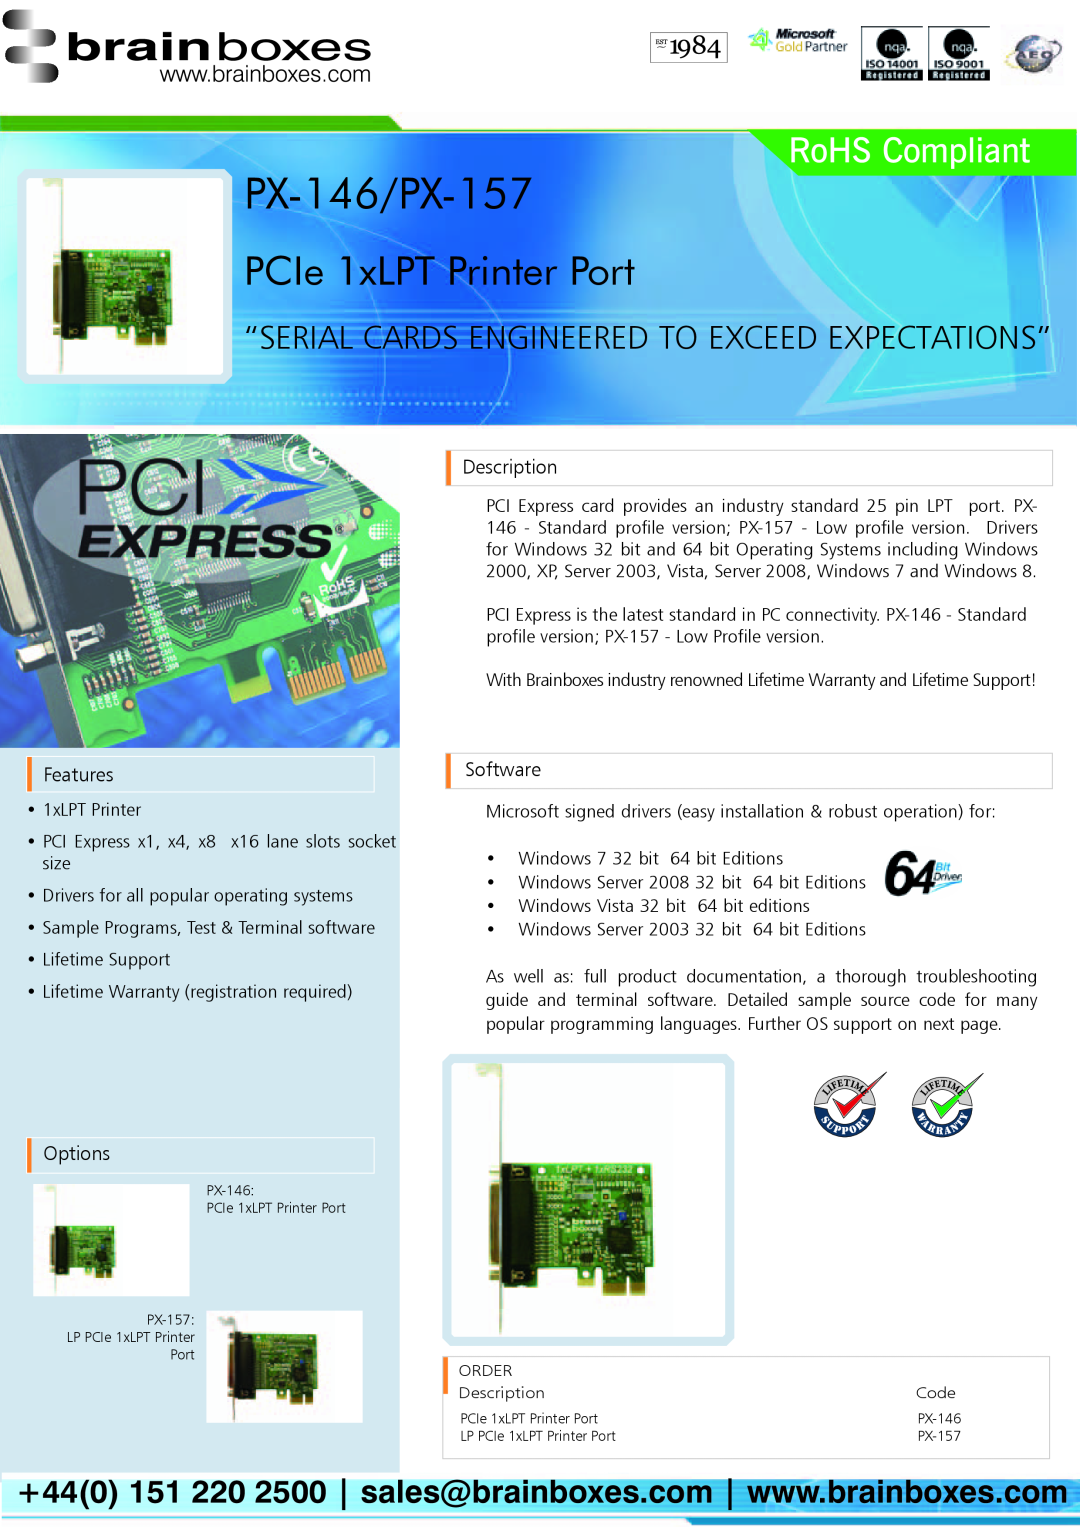 Brainboxes PX-146 manual PCIe 1xLPT Printer Port, “SERIAL CARDs Engineered to Exceed Expectations”, Description, Features 